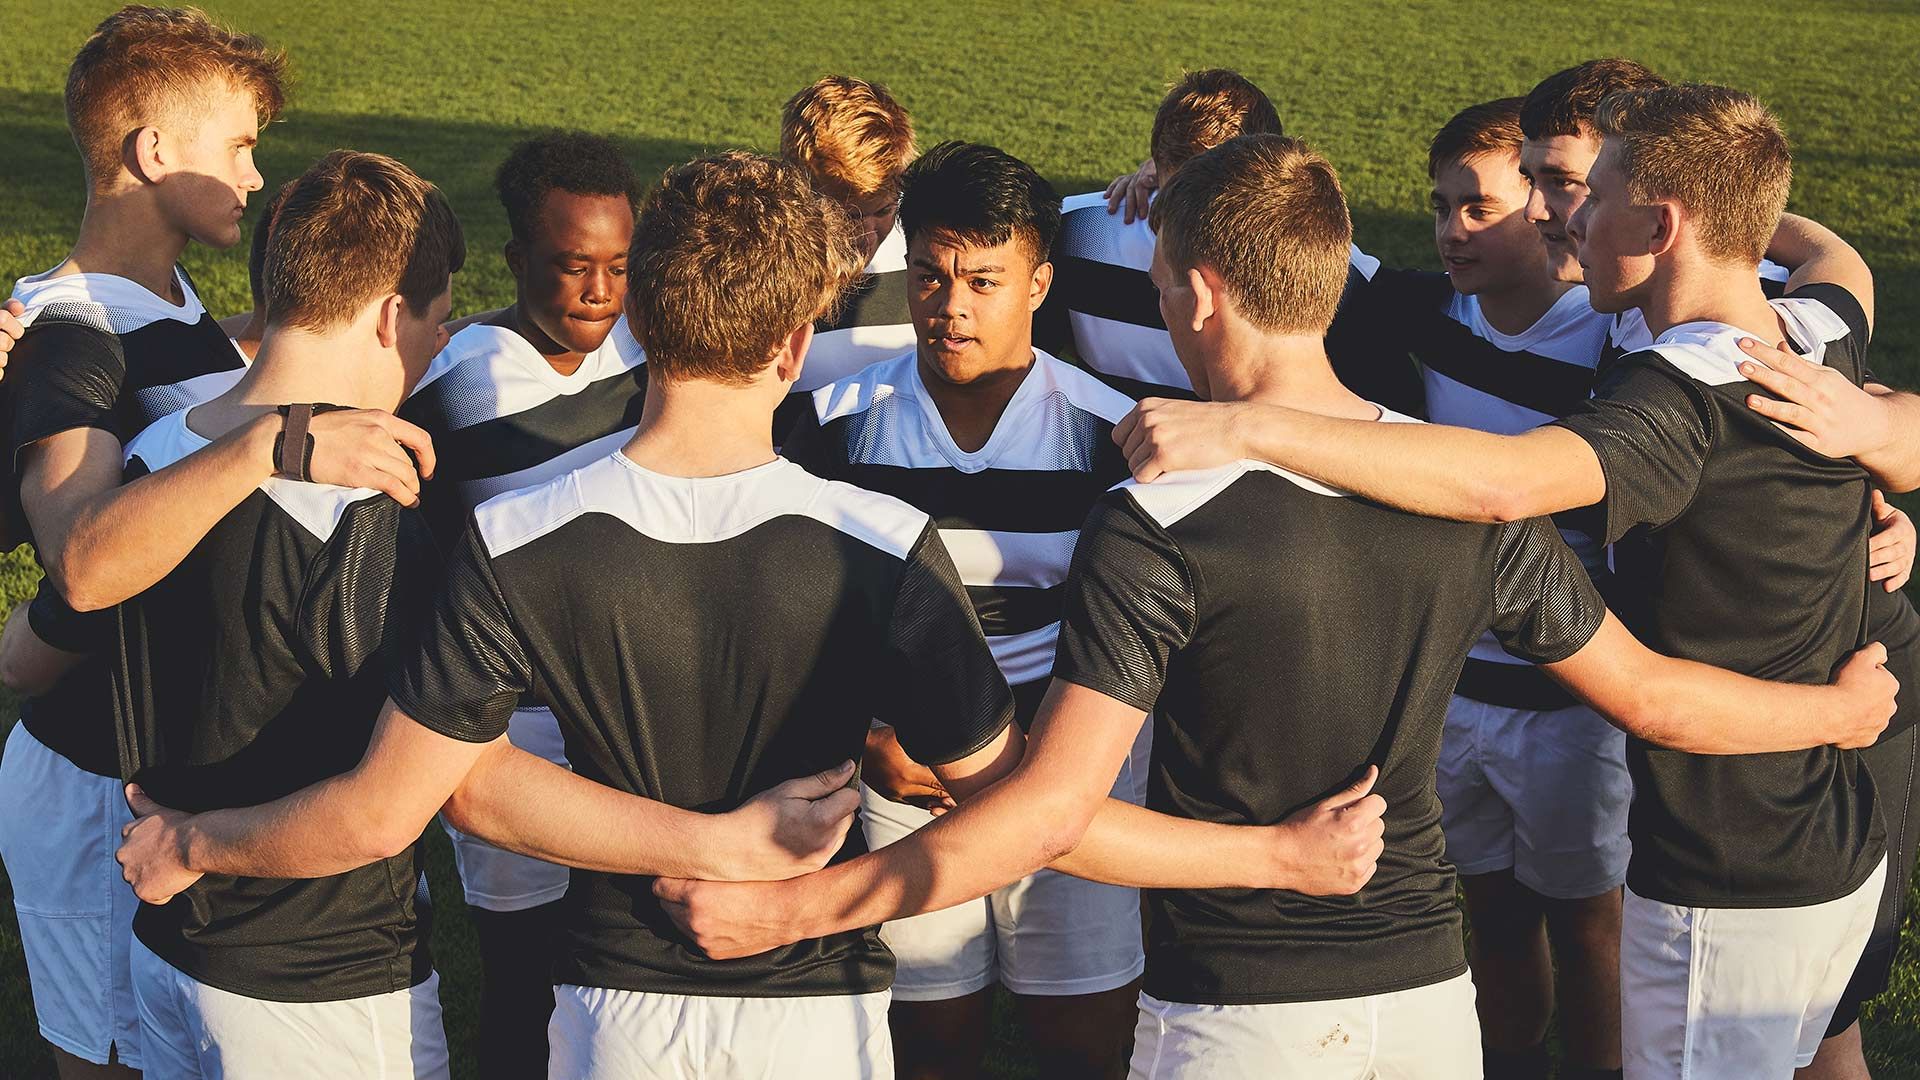 A group of young athletes in a huddle position